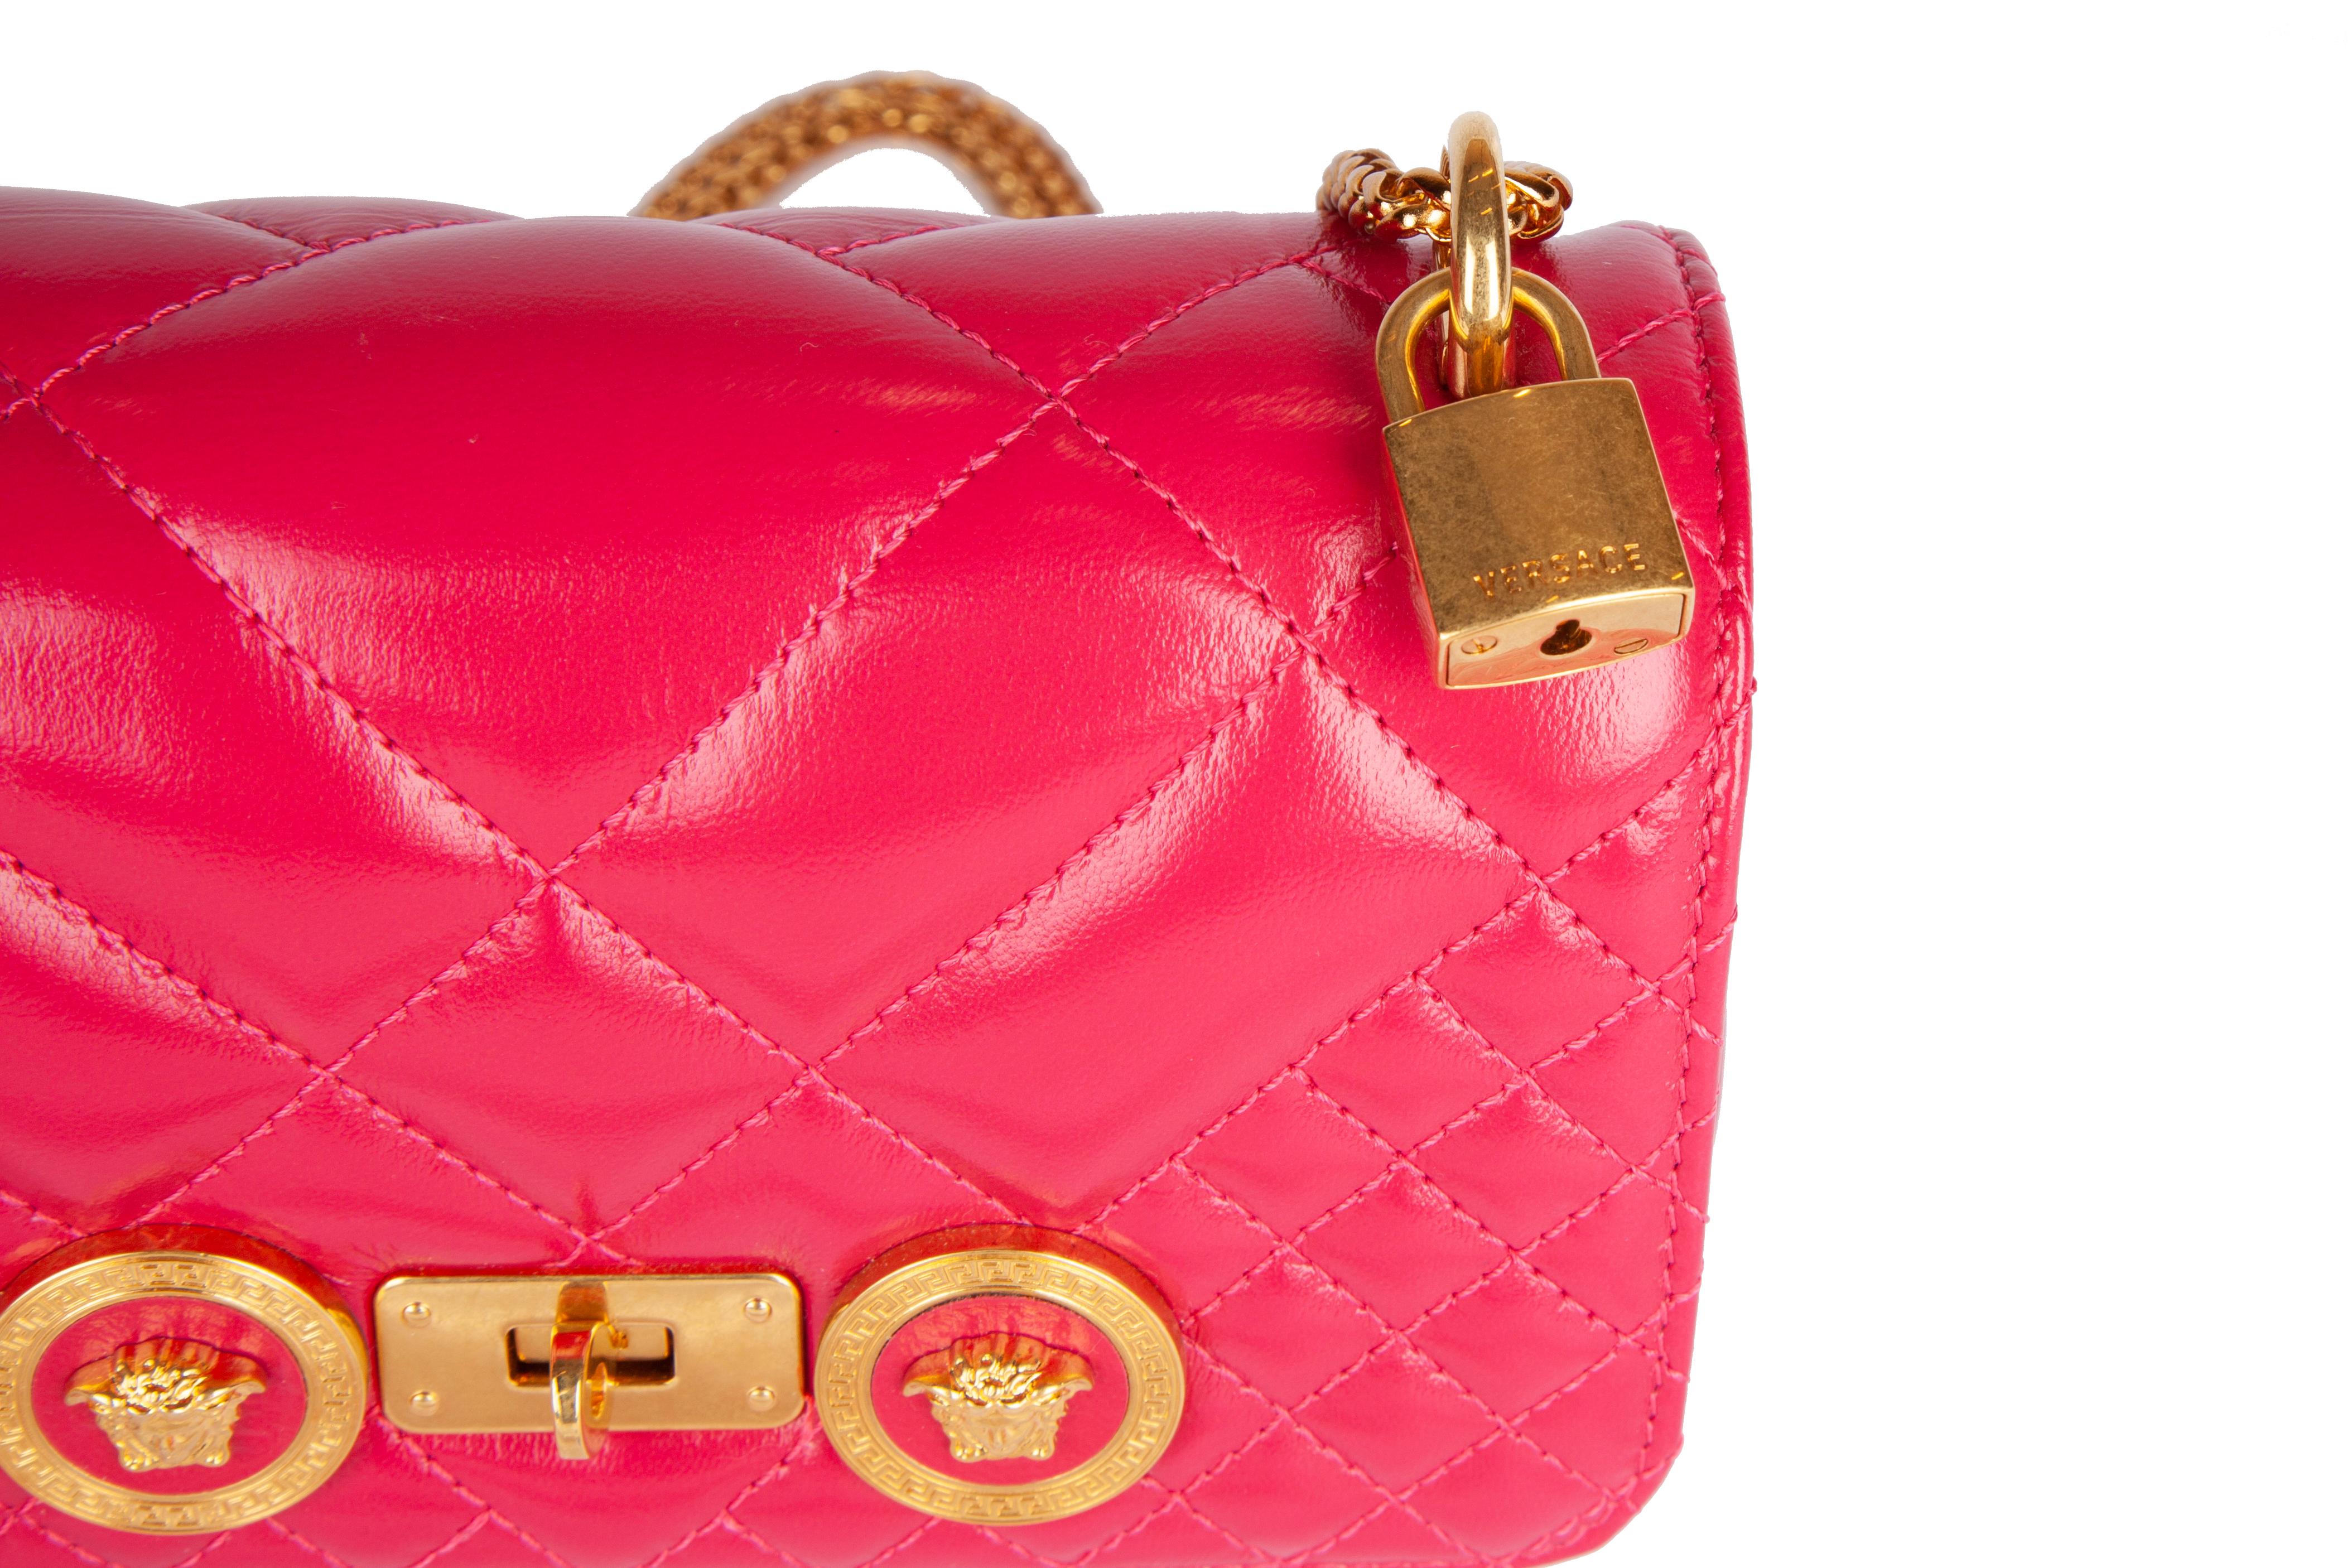 This Versace small fuchsia pink icon shoulder bag features quilted shiny calf leather, gold tone chain and hardware, a flap with medusa studs, a twist clasp, and one main compartment with a slip pocket. The small icon shoulder bag is both 